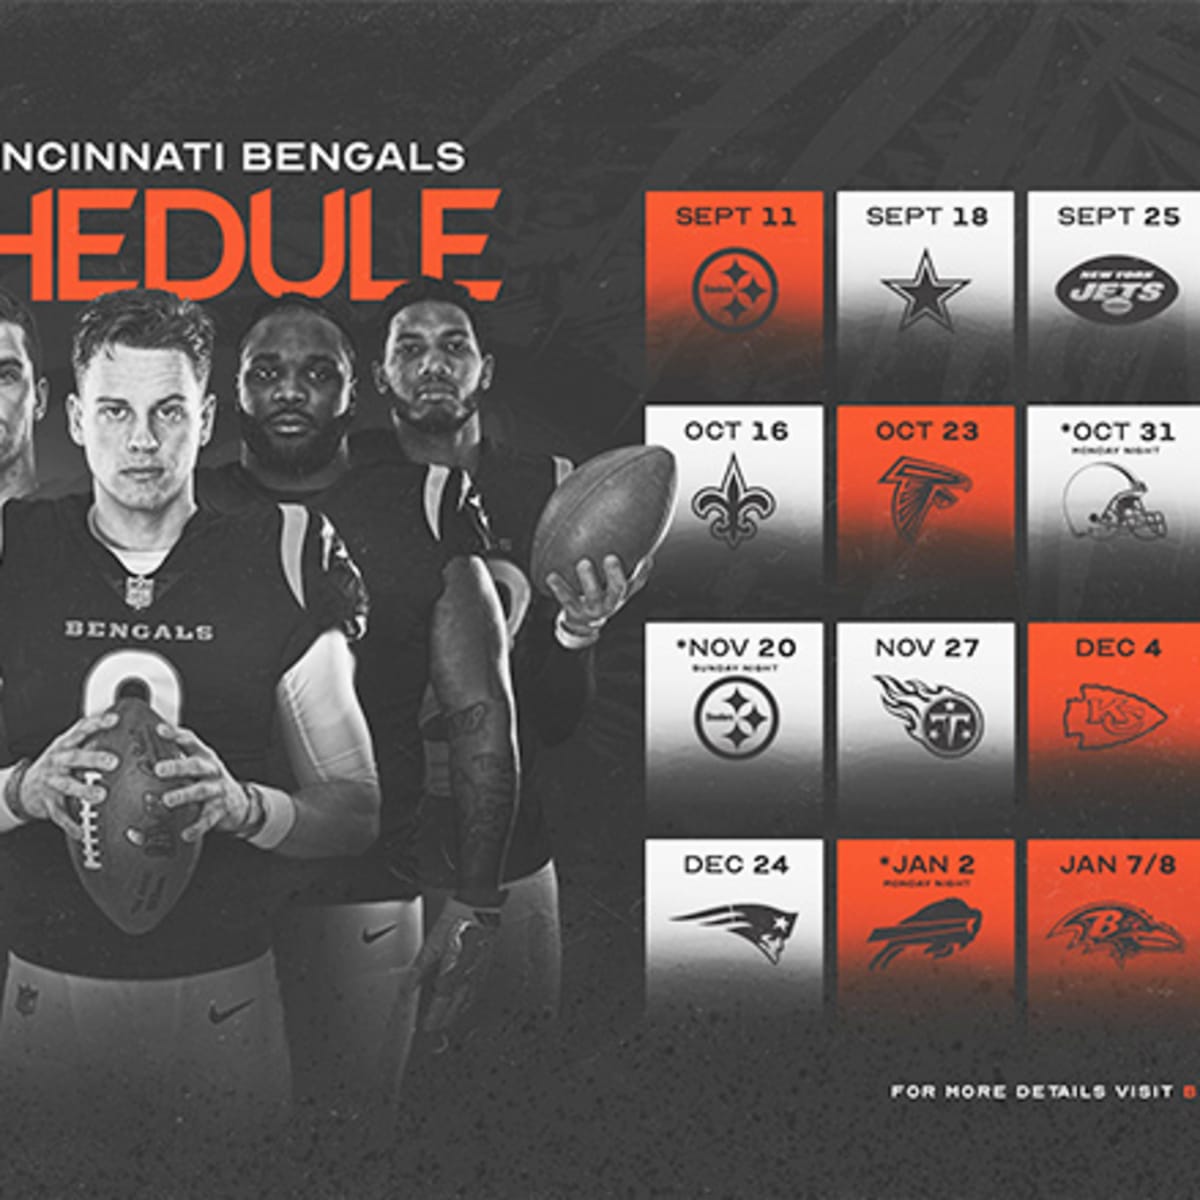 do the bengals play on sunday